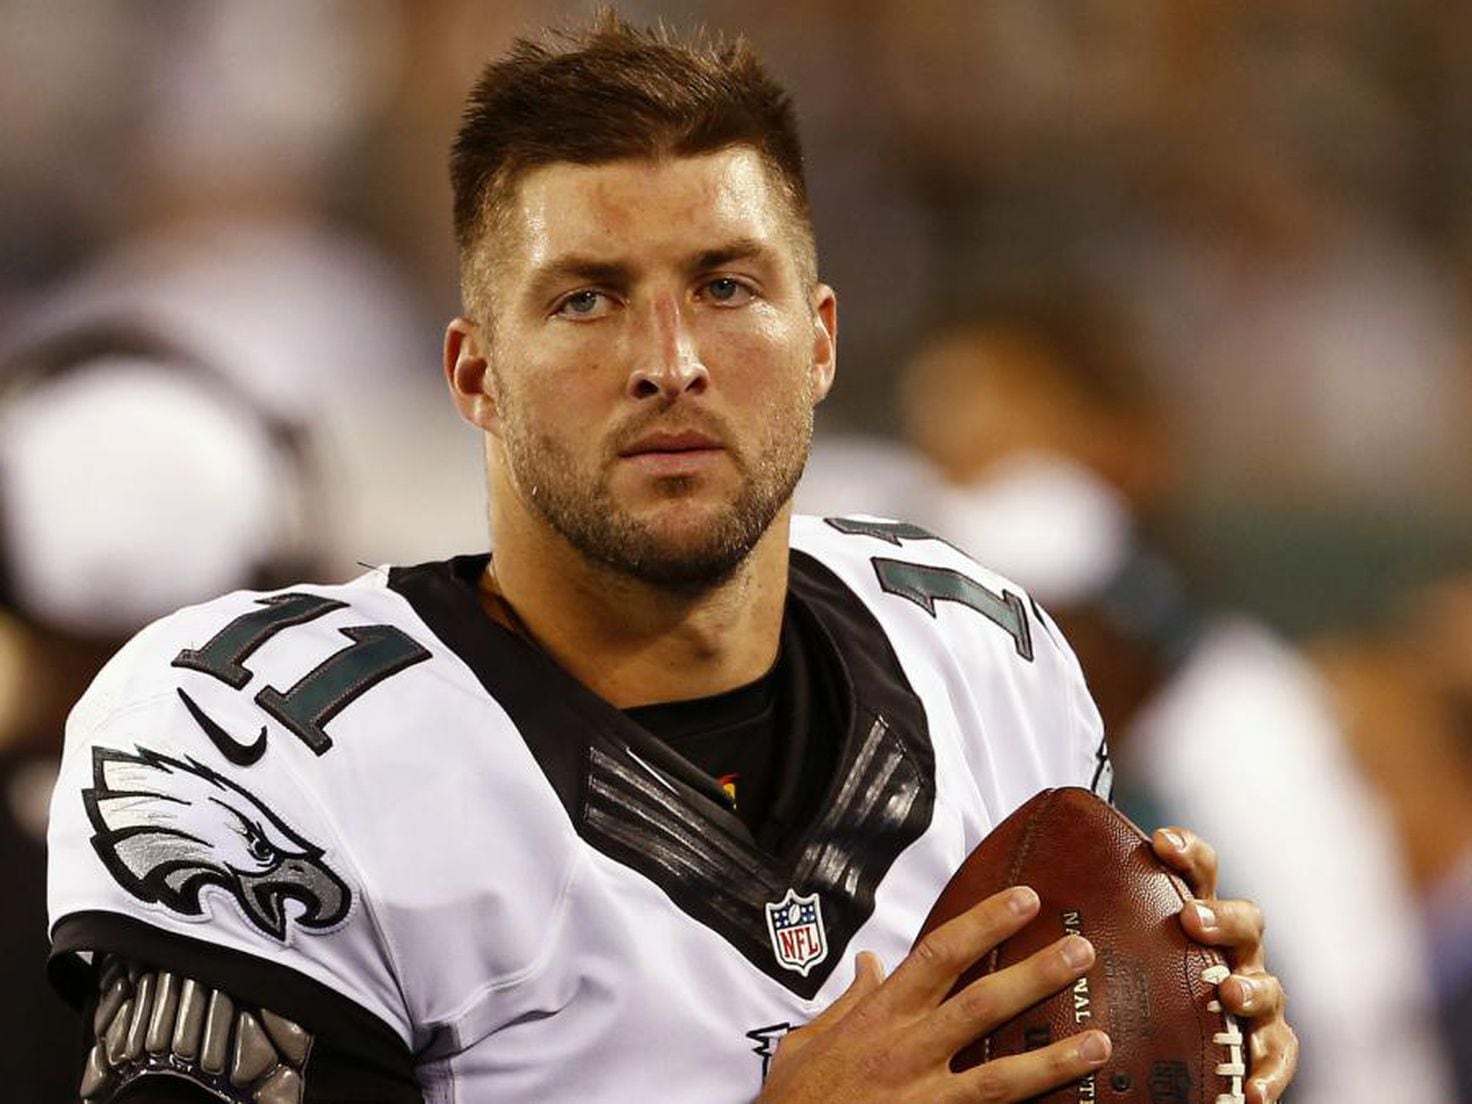 Tim Tebow's Mets jersey already leads MLB sales